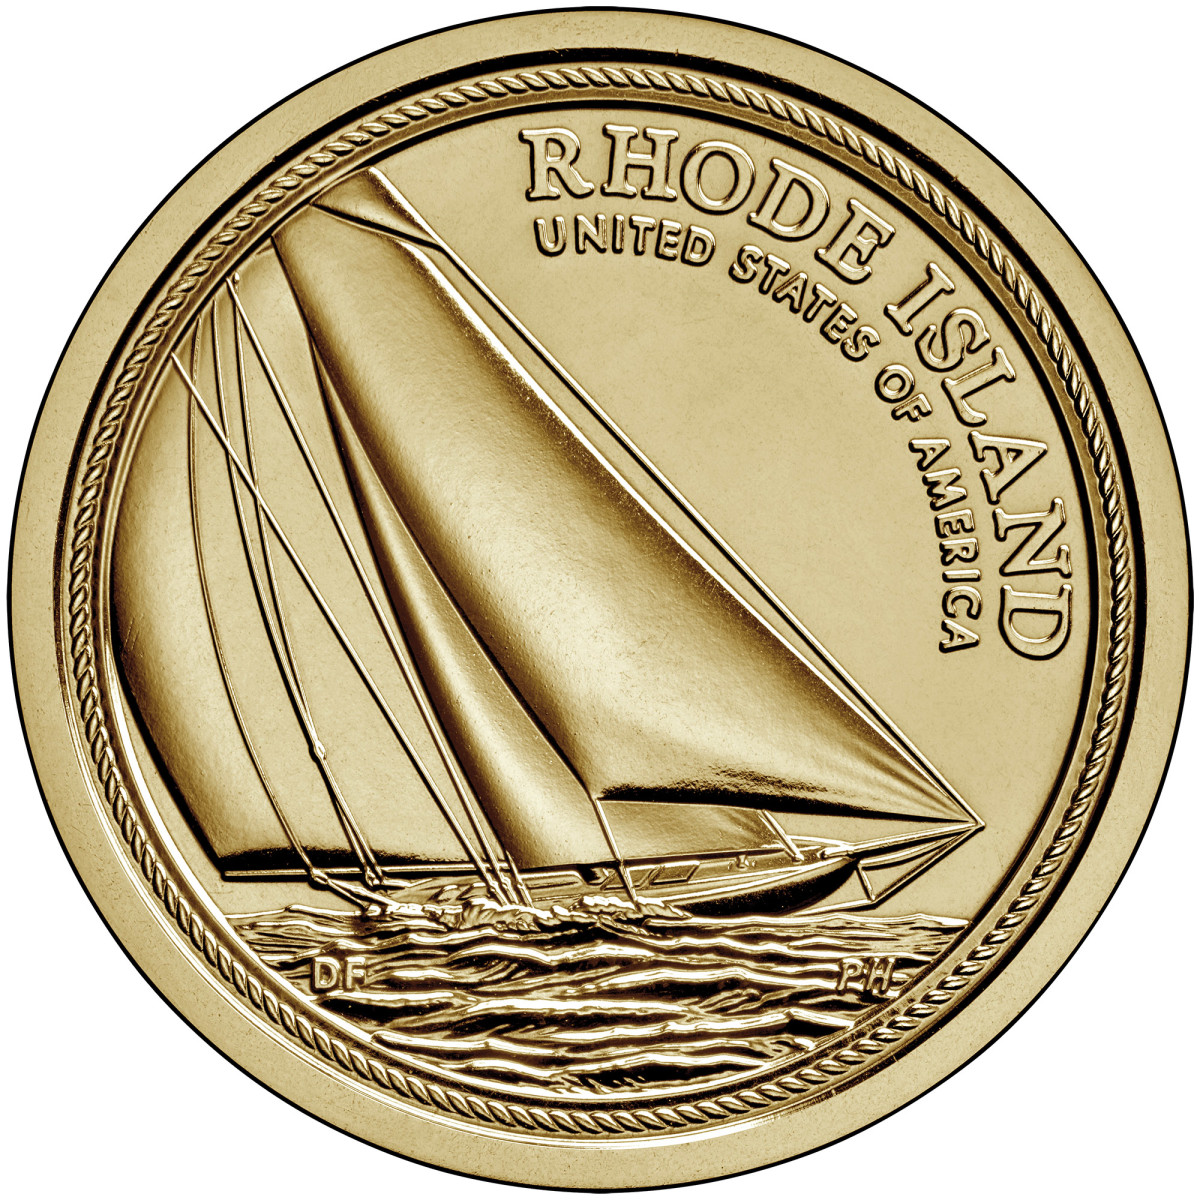 2022-american-innovation-one-dollar-coin-rhode-island-uncirculated-reverse